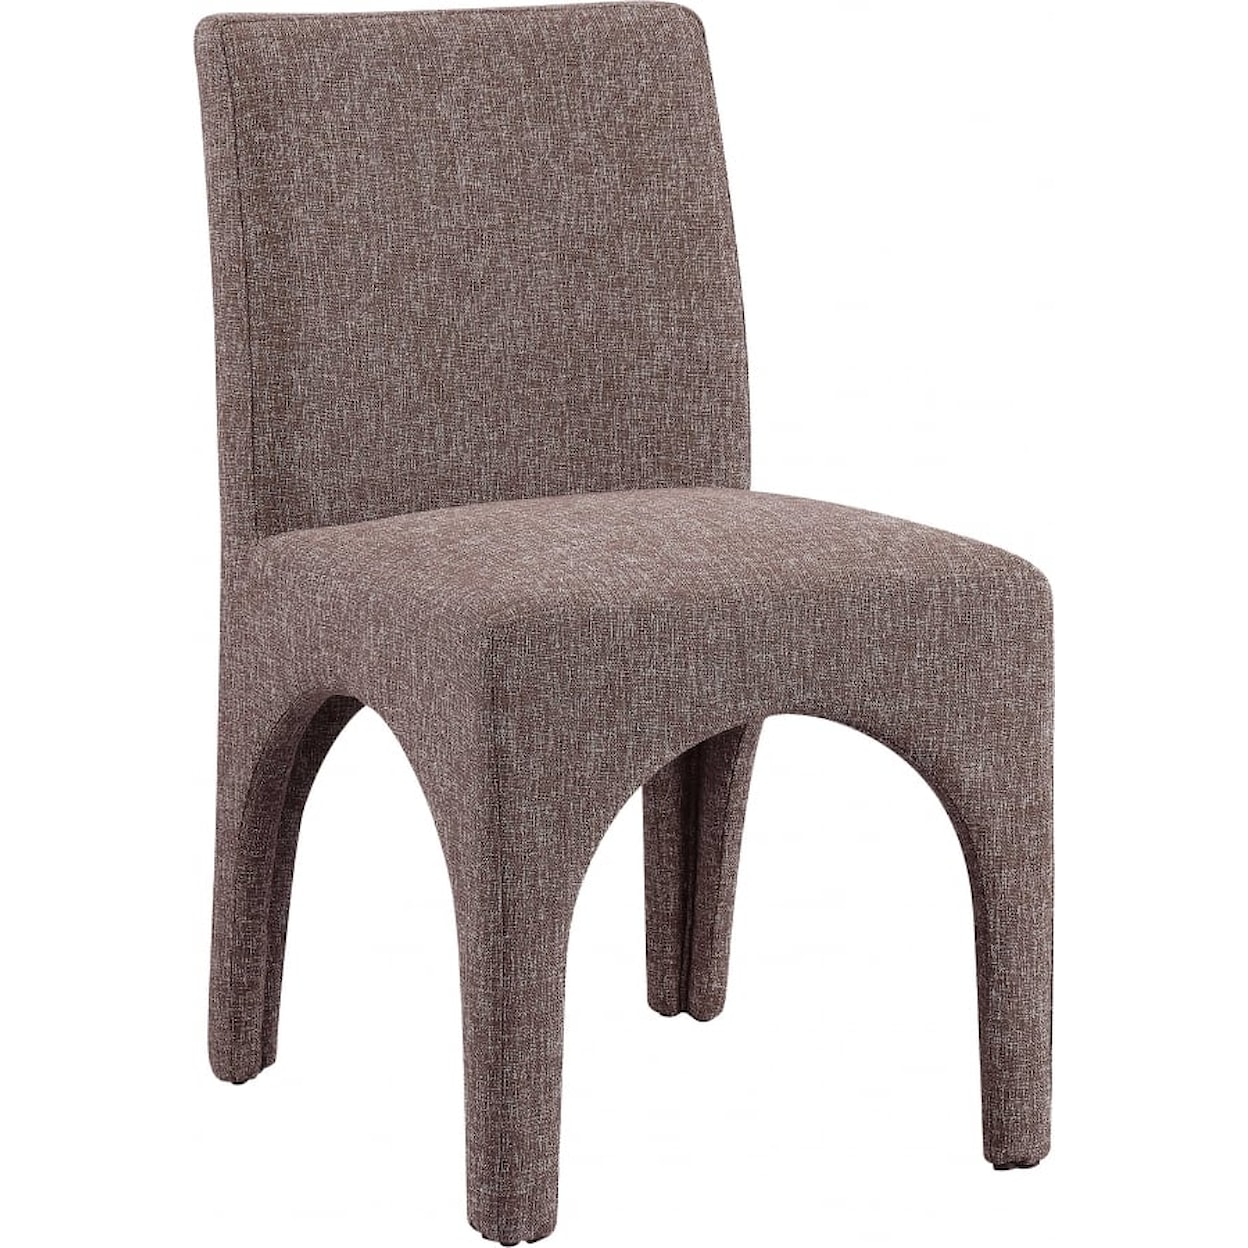 Meridian Furniture Gramercy Dining Chair